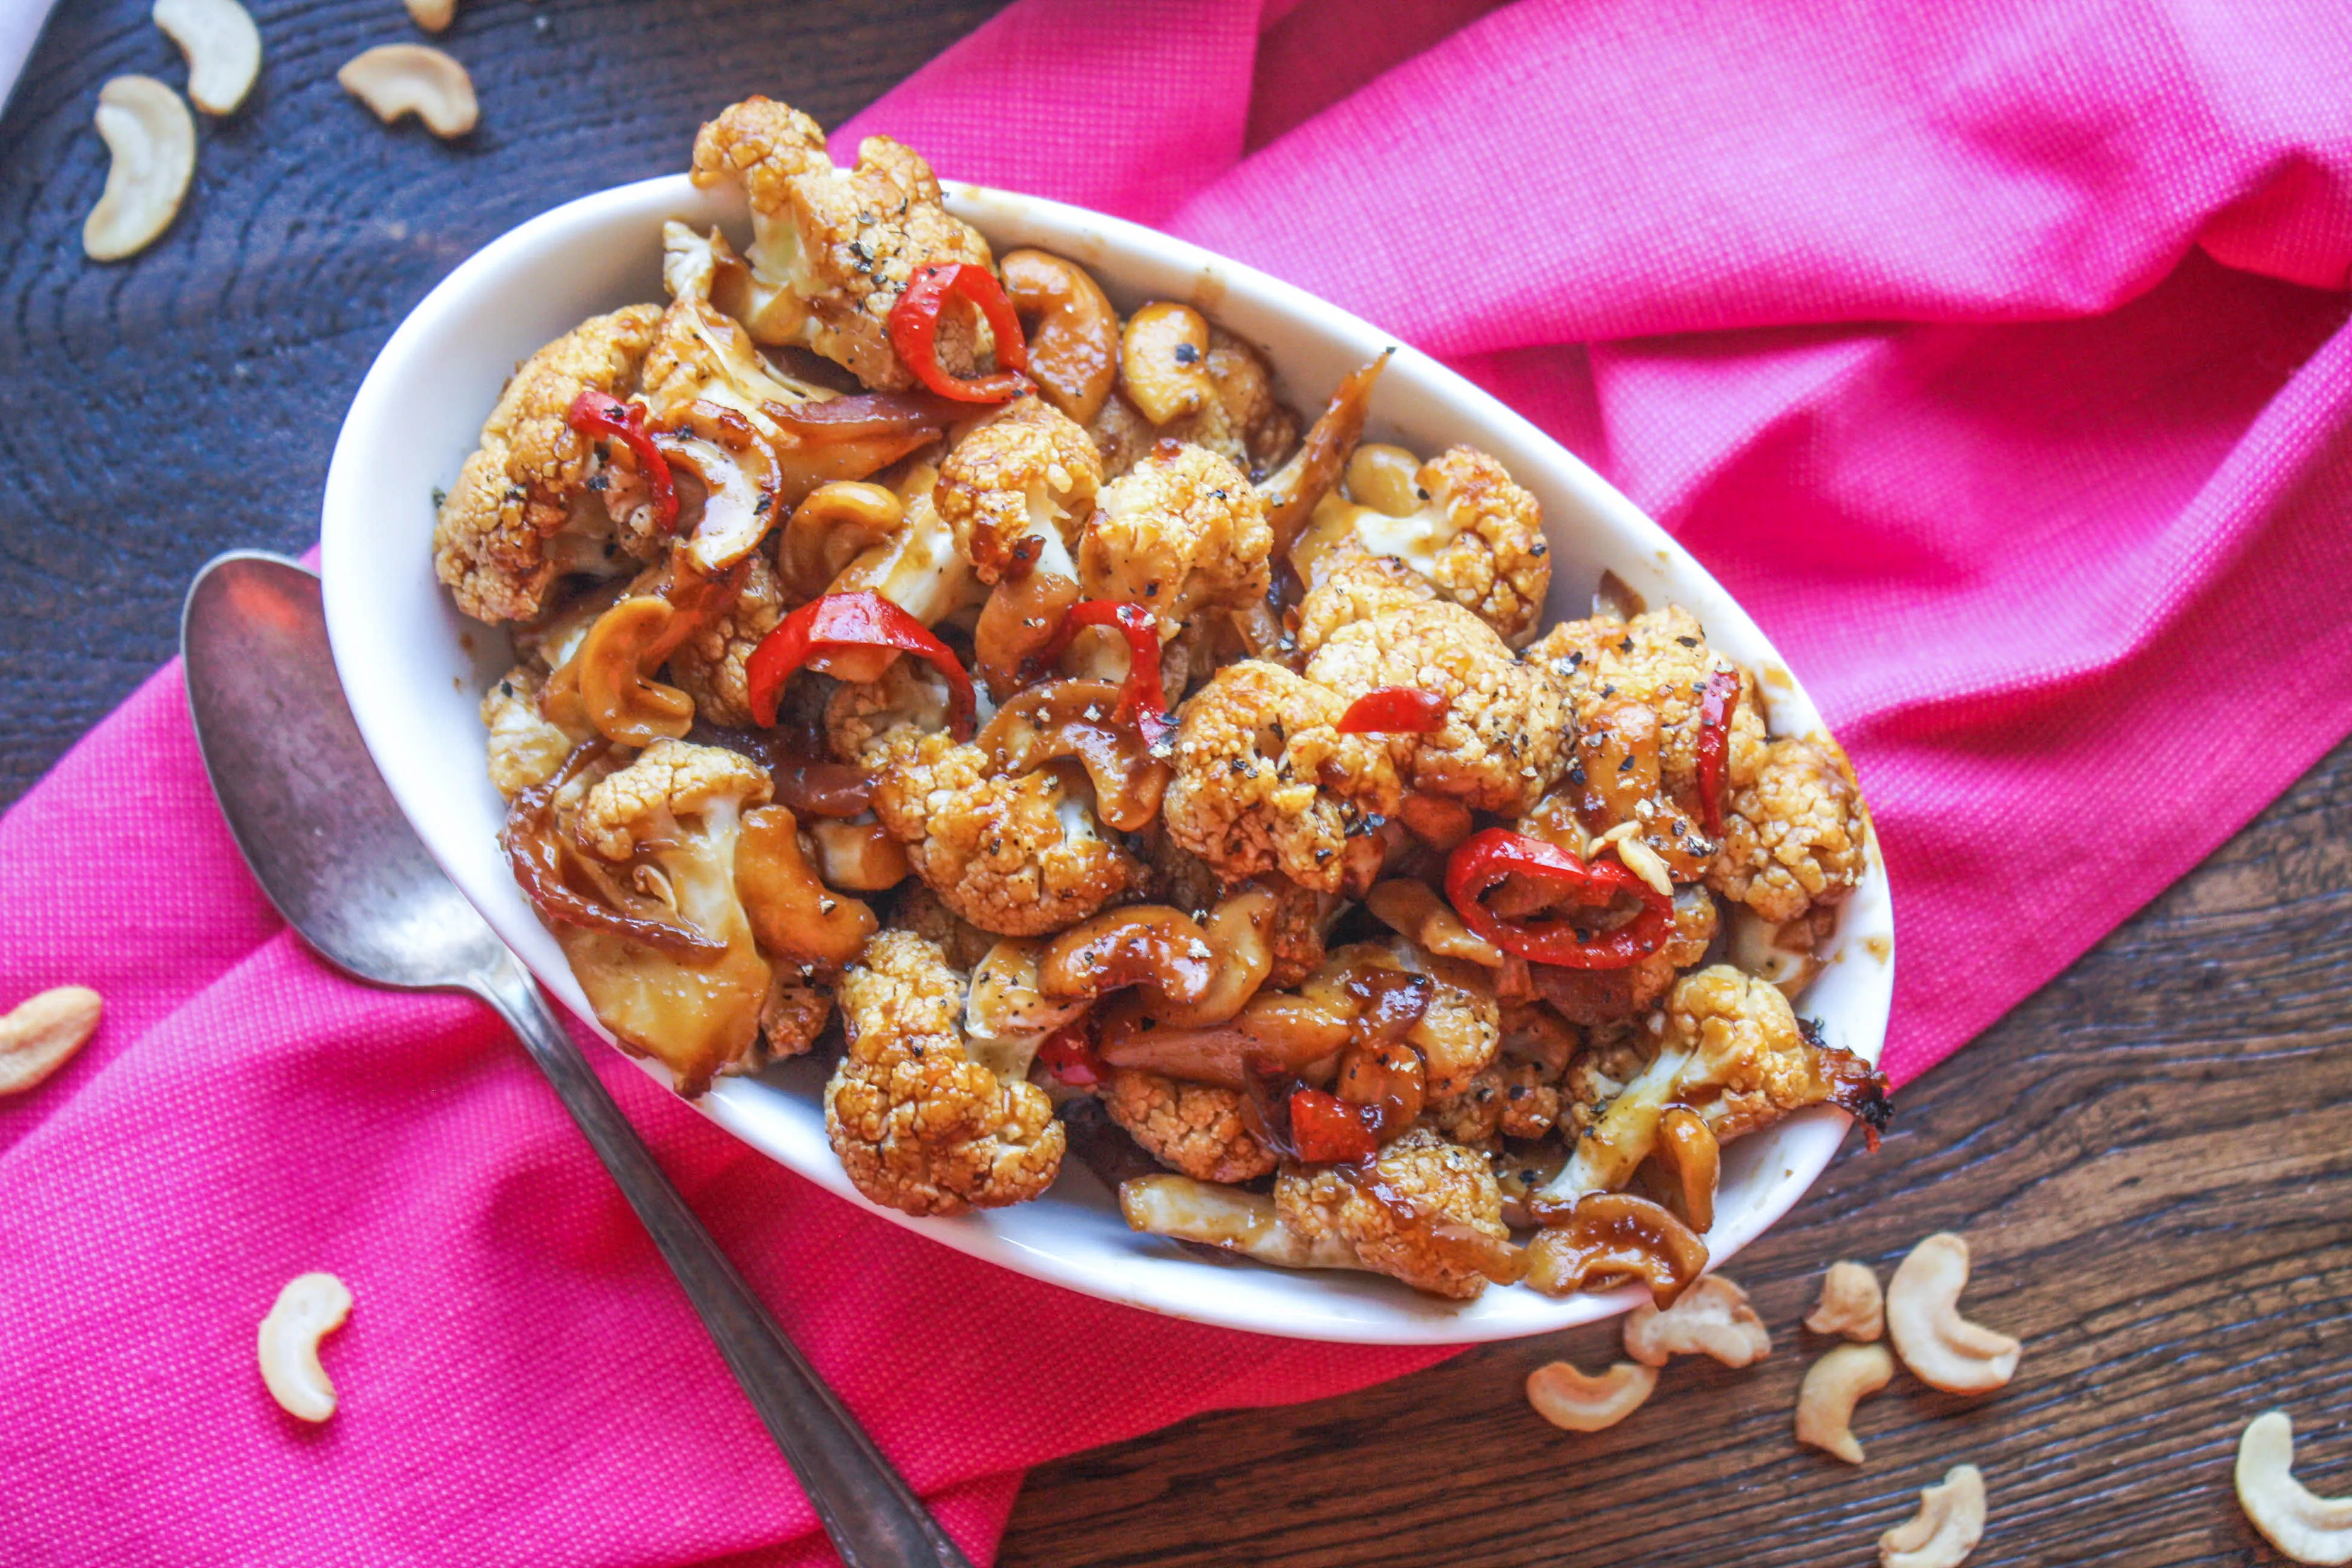 Kung Pao Cauliflower is a delicious meatless dish. Forget about take out and make this recipe instead!